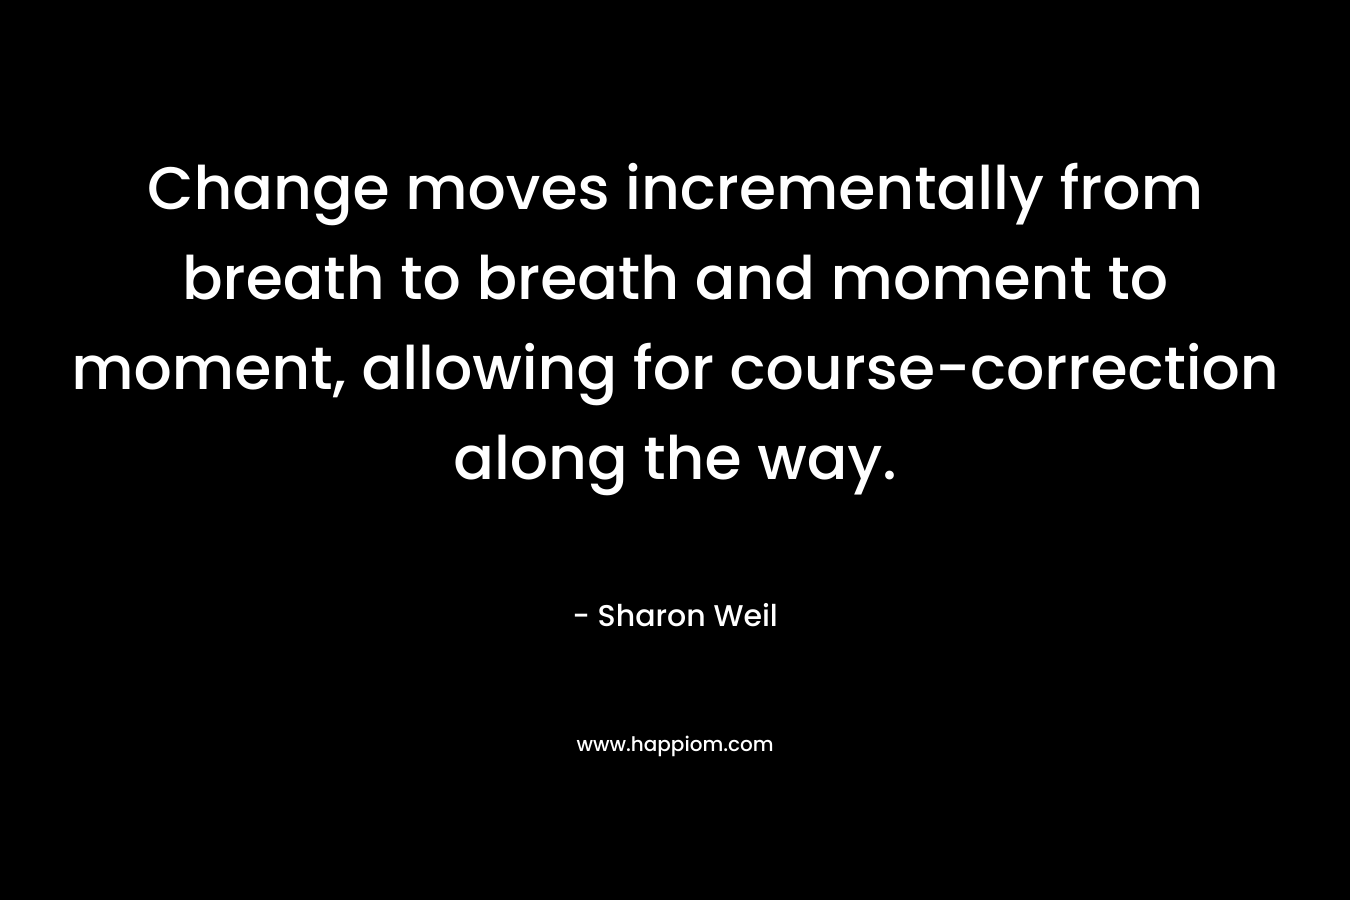 Change moves incrementally from breath to breath and moment to moment, allowing for course-correction along the way.